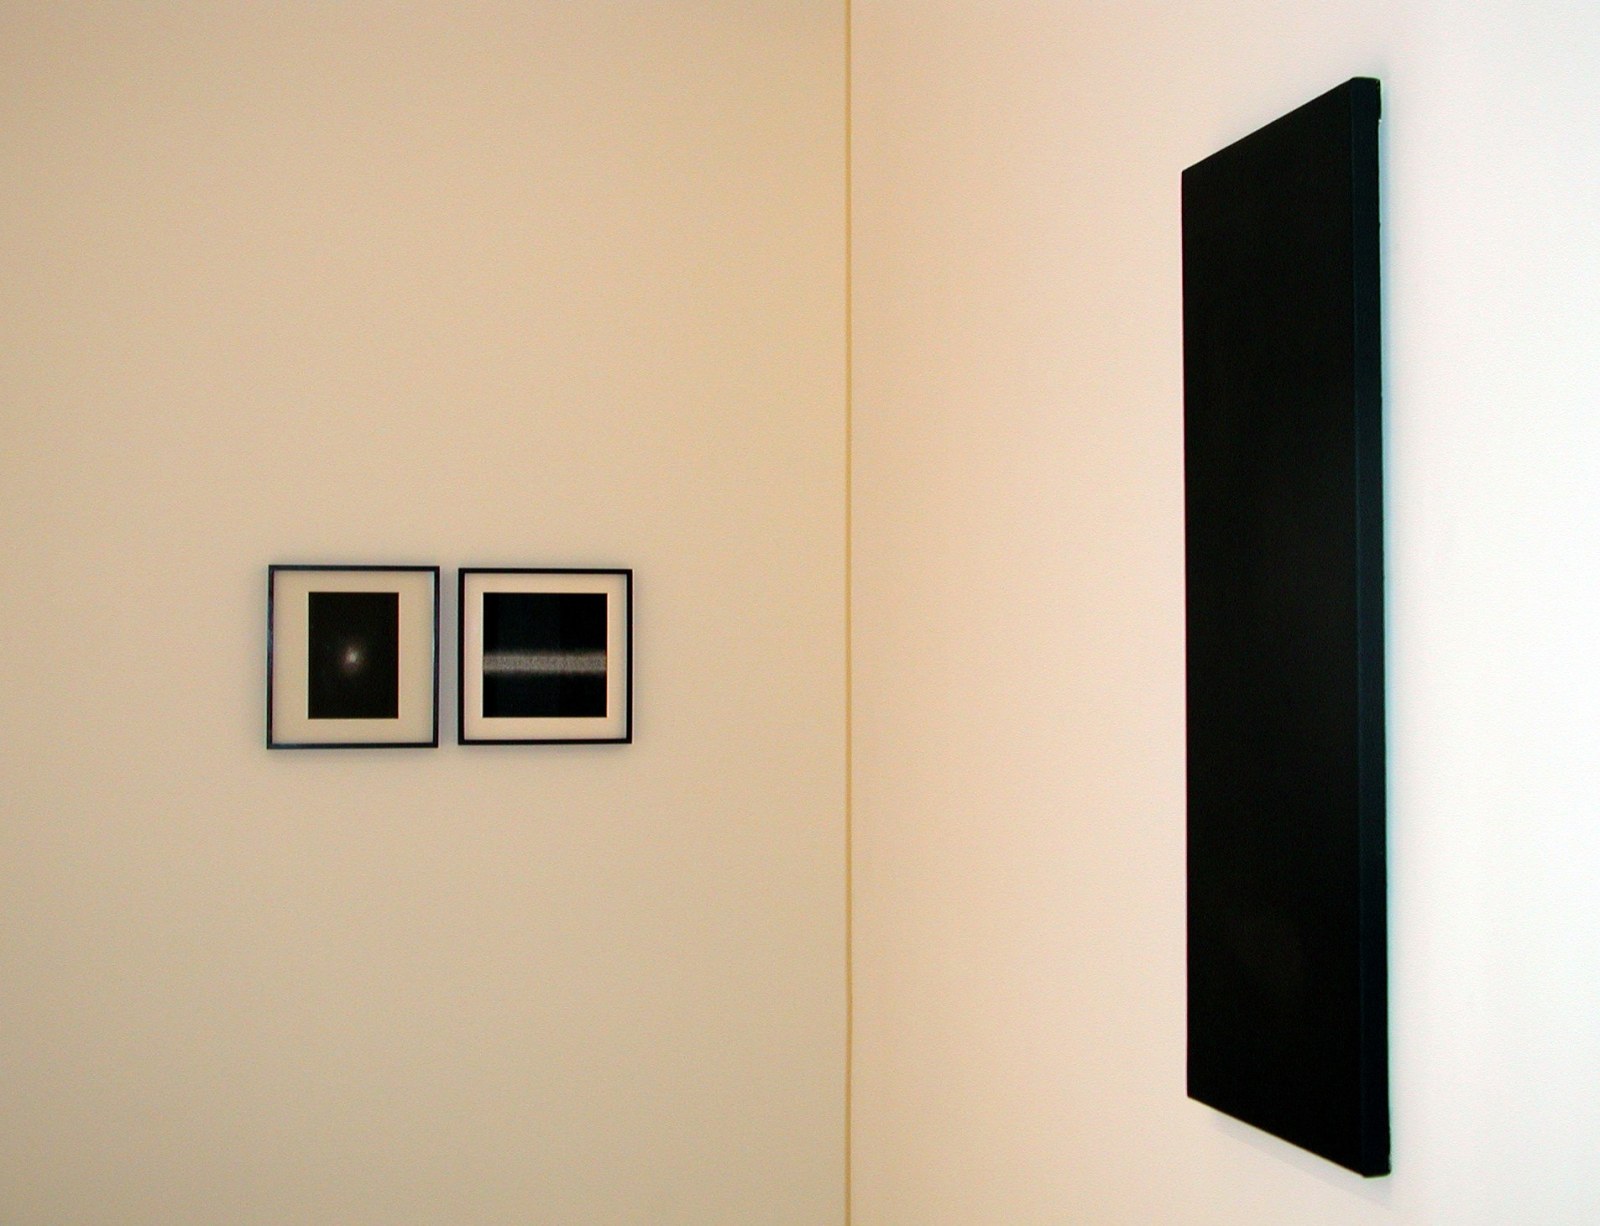 Installation view of Shirazeh Houshiary exhibition in 2003 at Lehmann Maupin in New York, view 2